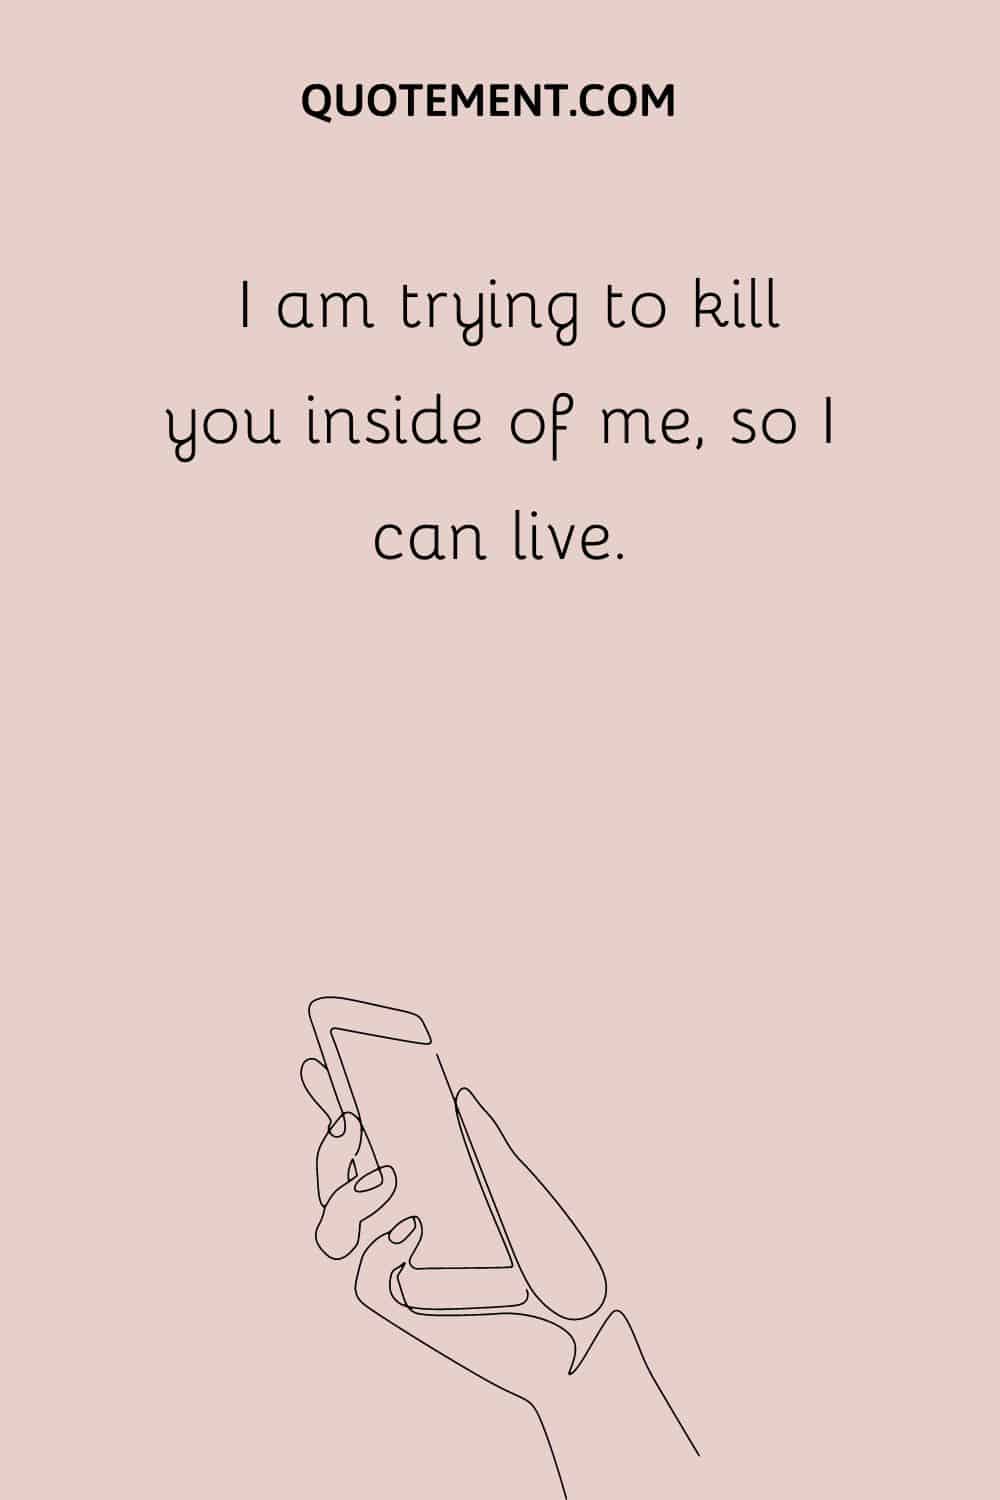 I am trying to kill you inside of me, so I can live